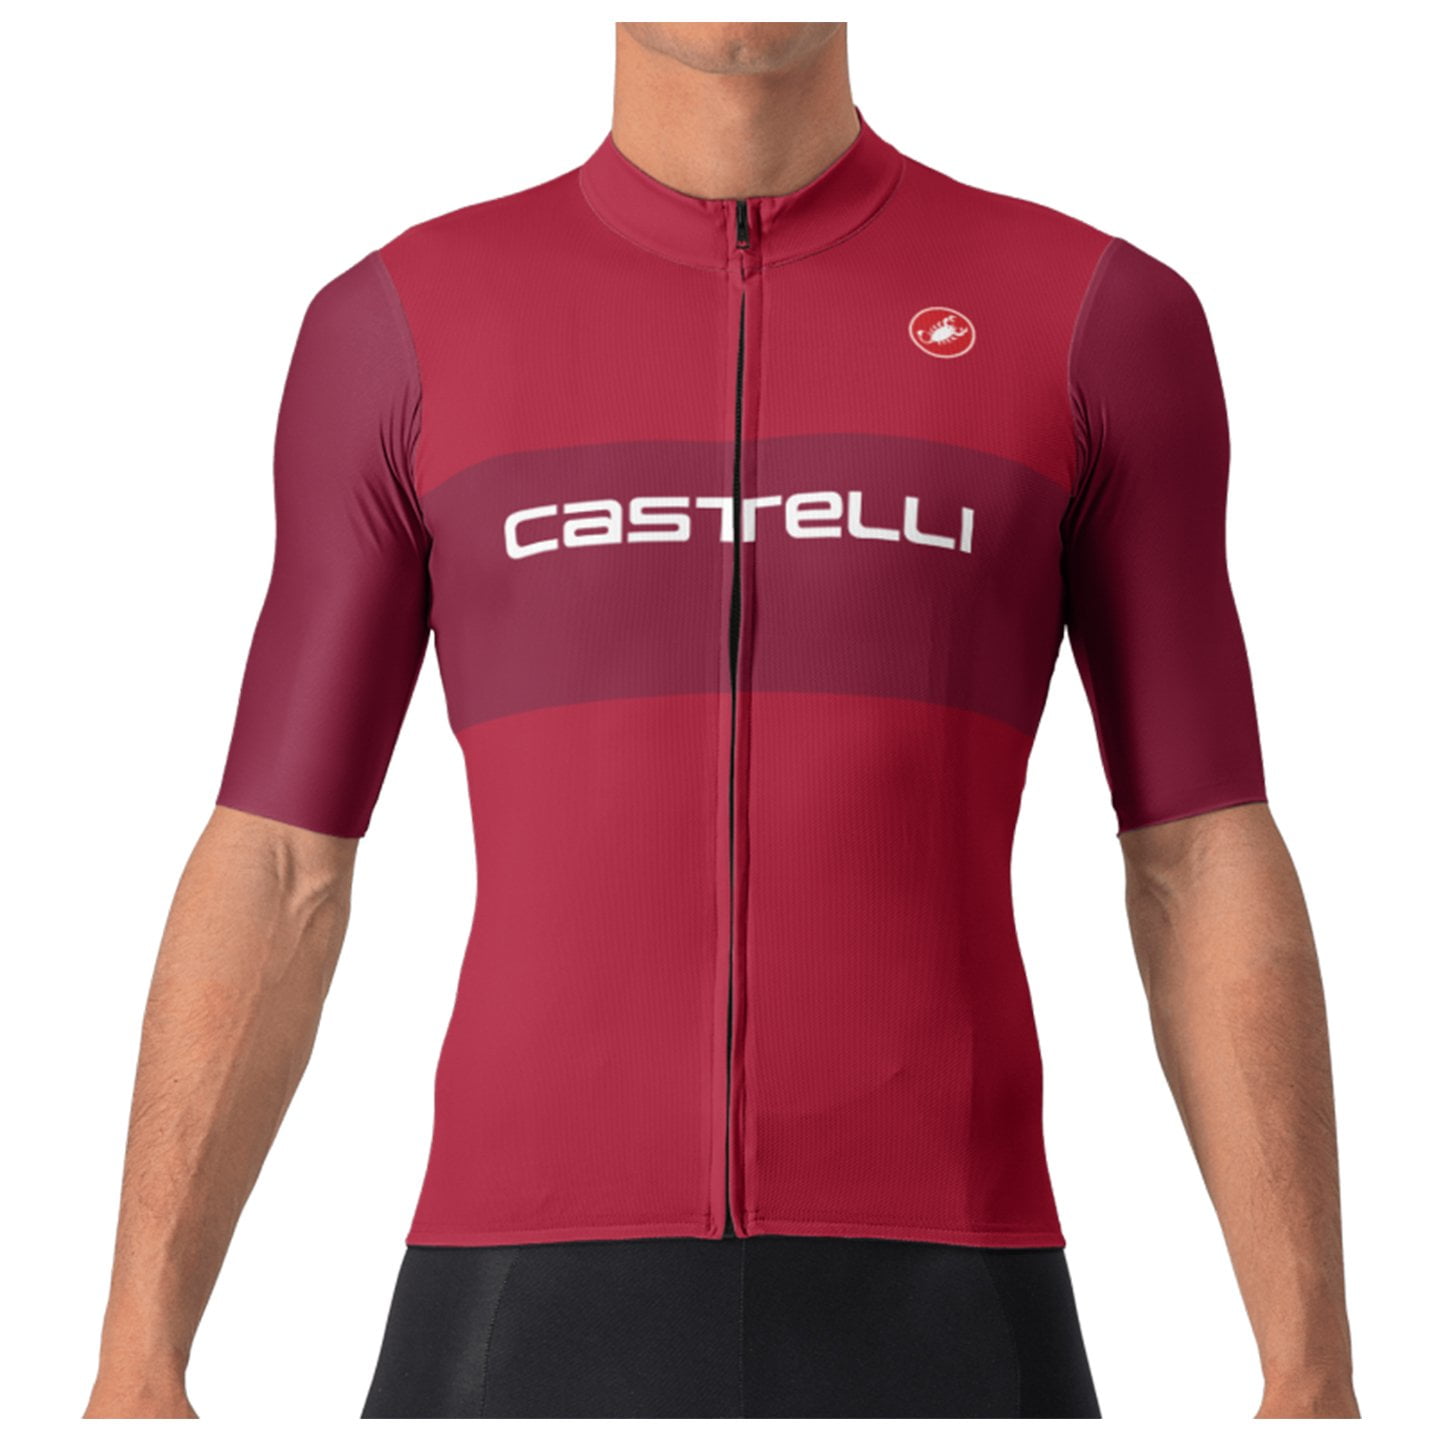 CASTELLI Fan Block Short Sleeve Jersey, for men, size 2XL, Cycling jersey, Cycle clothing